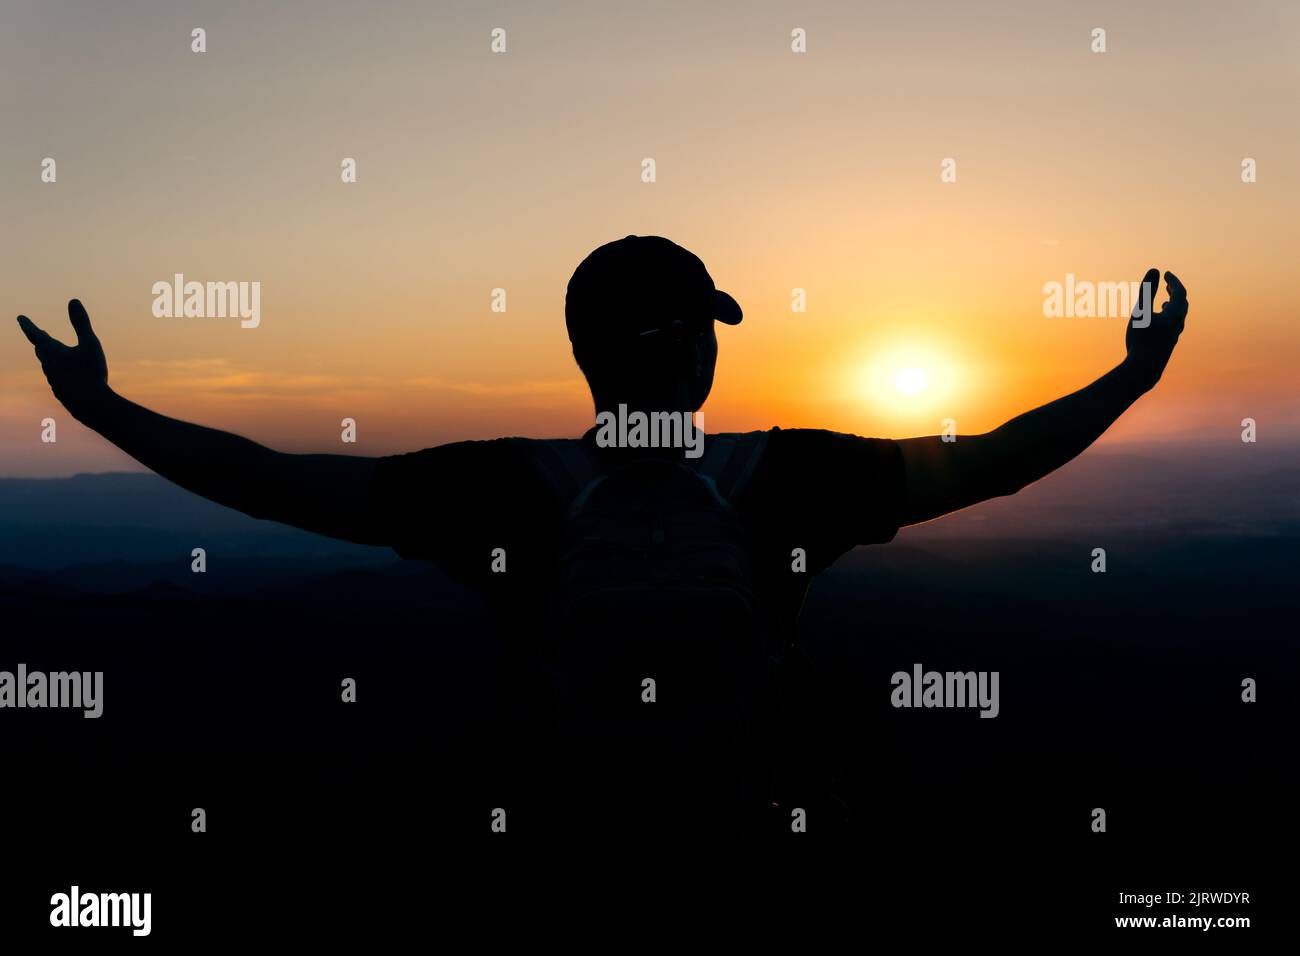 Sunset with a silhouette of a young man with a cap in an attitude of gratitude to the sun, with a background of mountains. Stock Photo